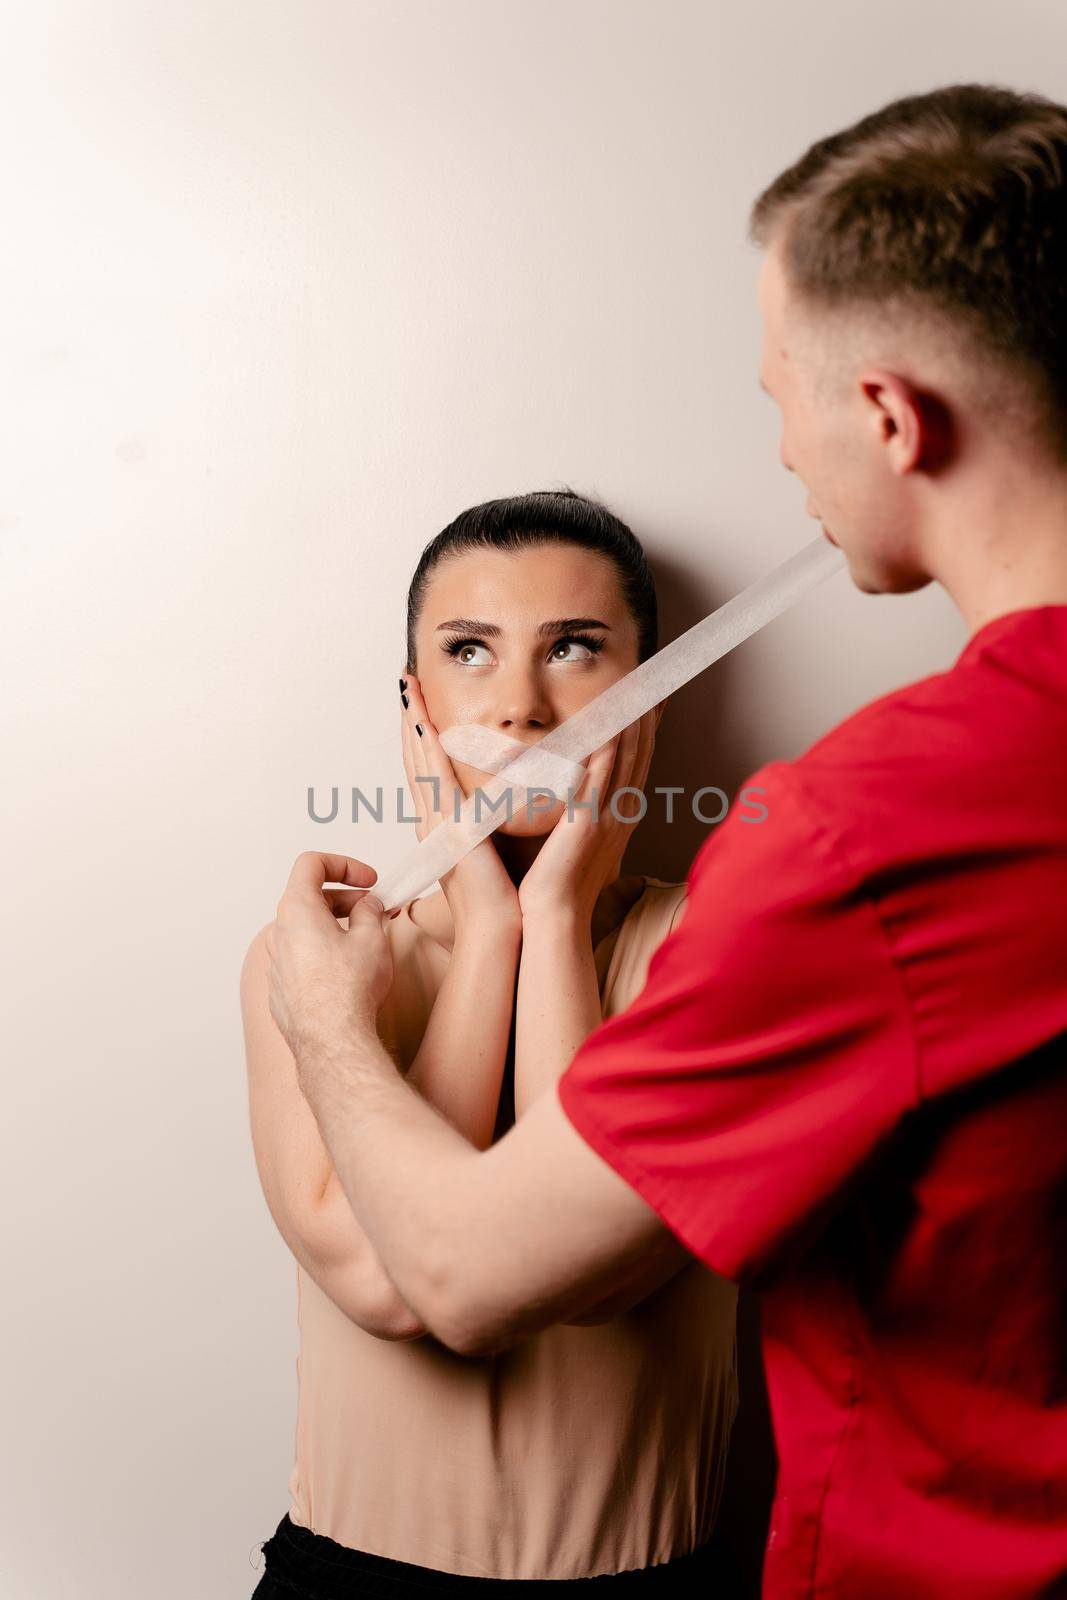 Model with glued mouth. Man covers woman mouth with tape. Stop talking